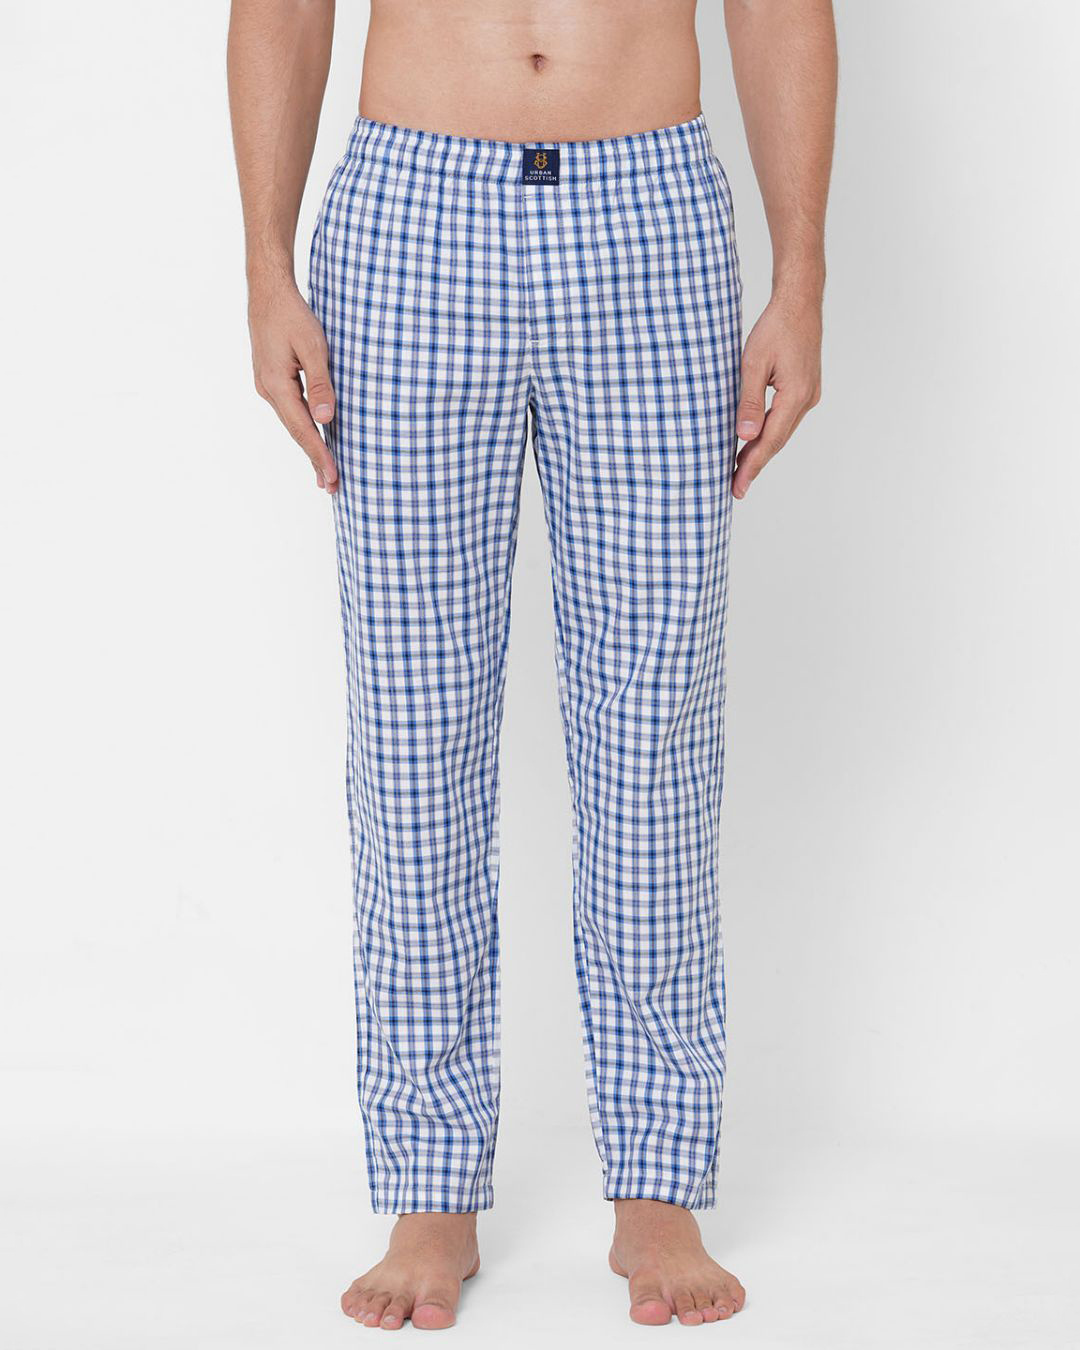 Buy Men's Blue Checked Cotton Lounge Pants Online in India at Bewakoof